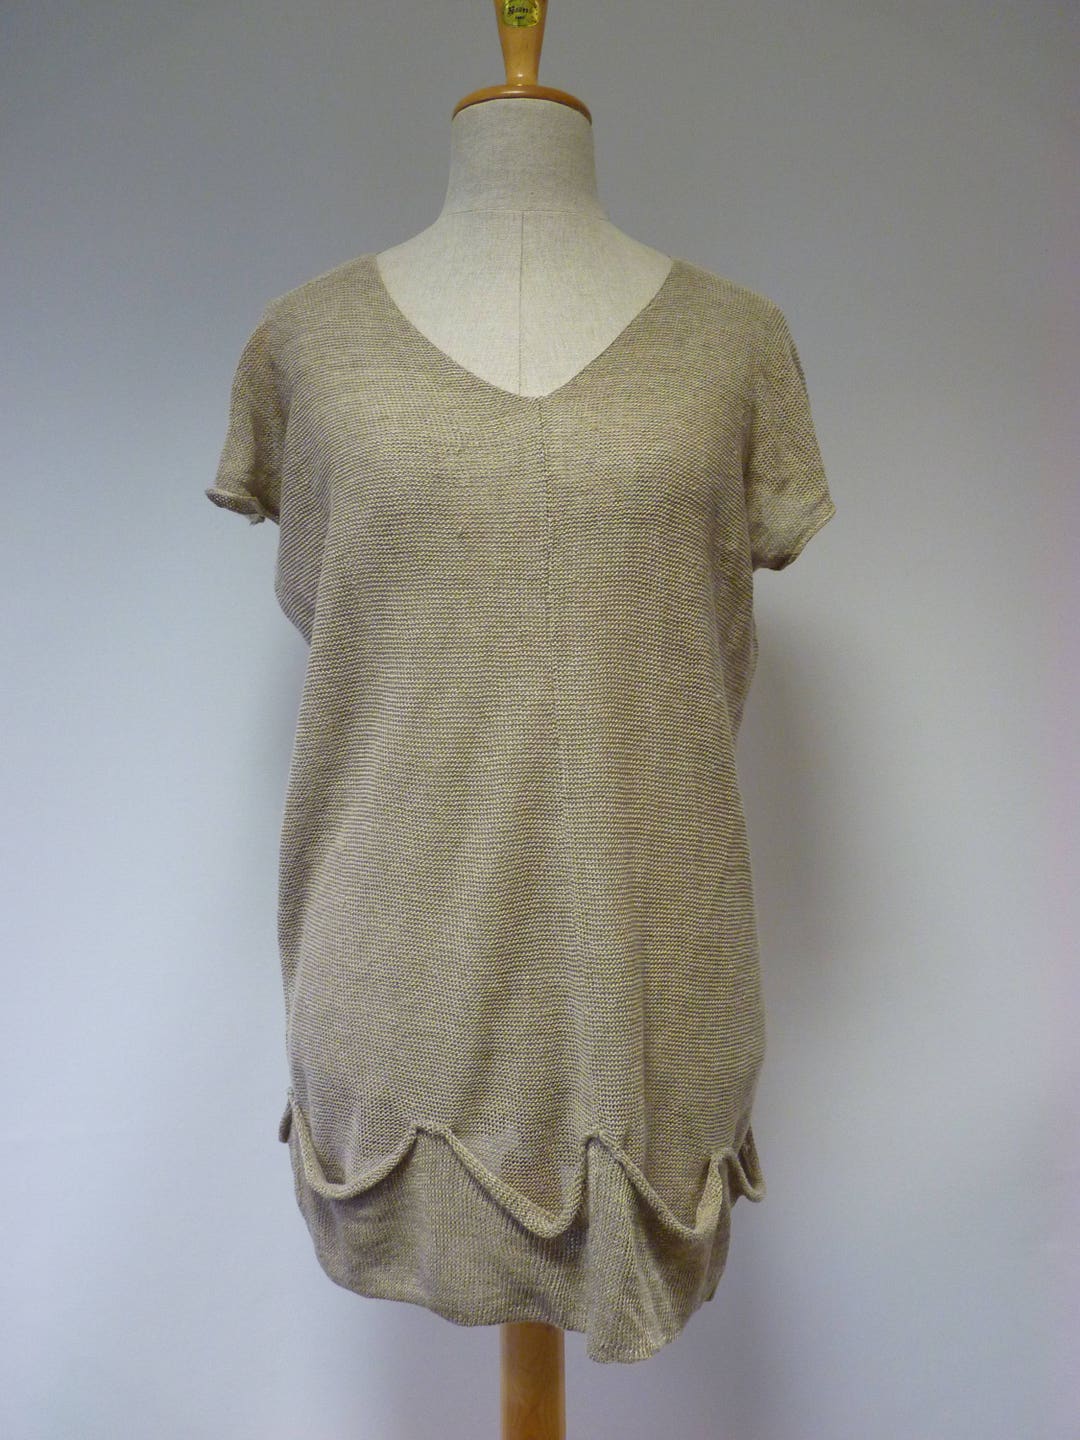 Transparent Taupe Knitted Blouse L Size. Made of Pure Linen. - Etsy